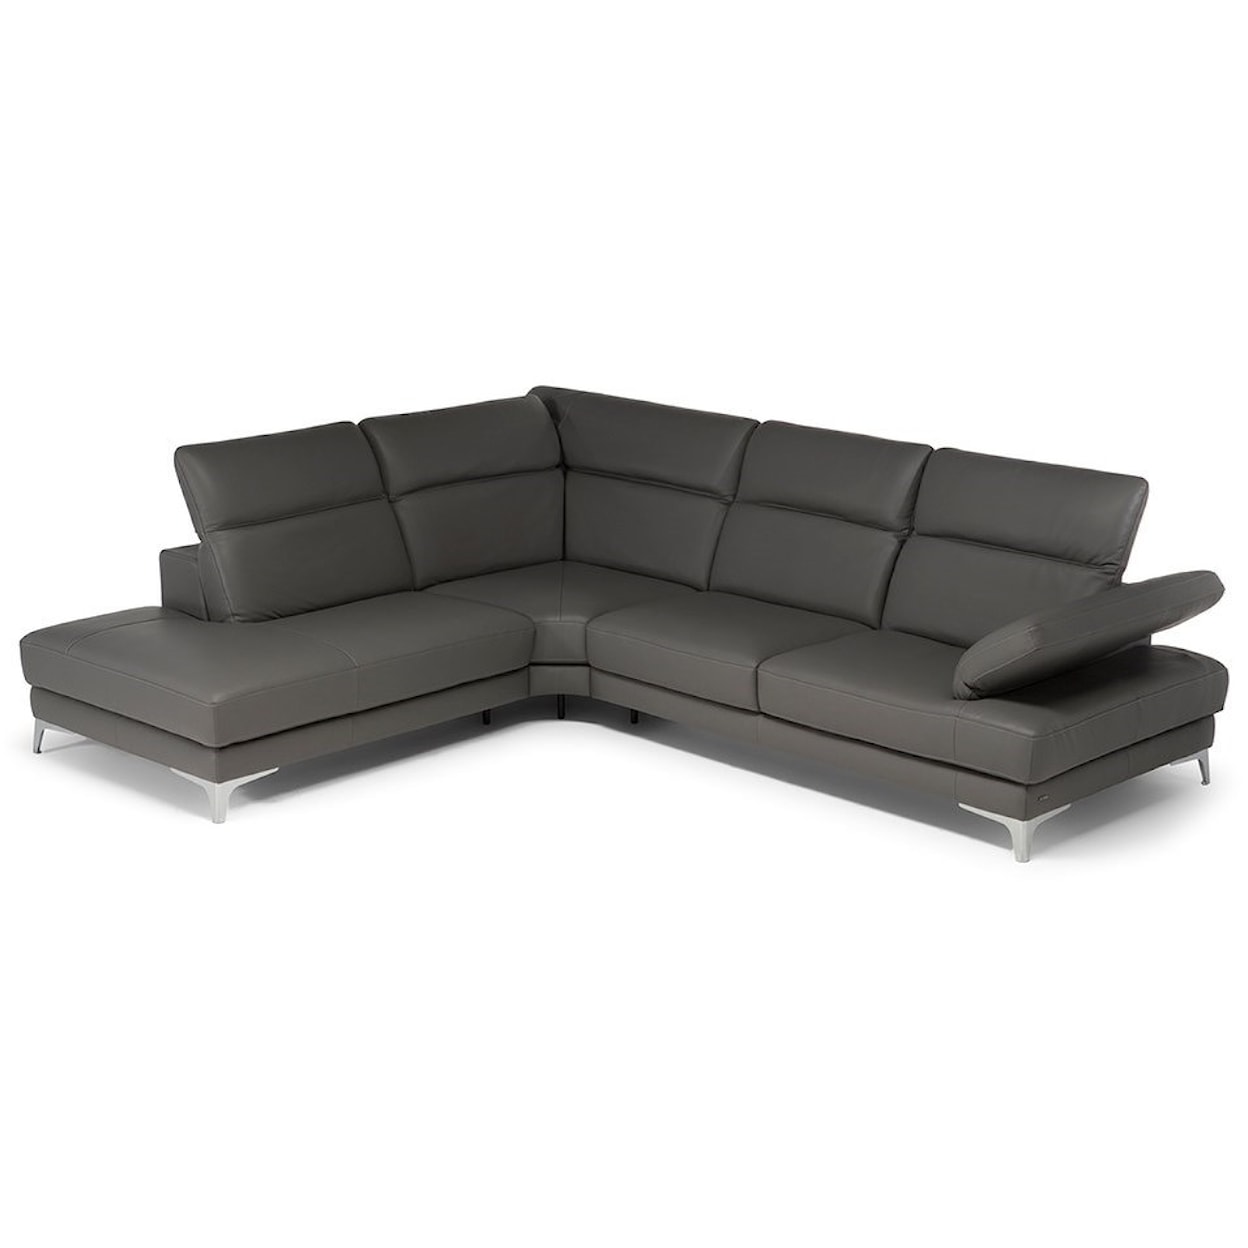 Natuzzi Editions 100% Italian Leather 3 Piece Sectional with LAF Chaise